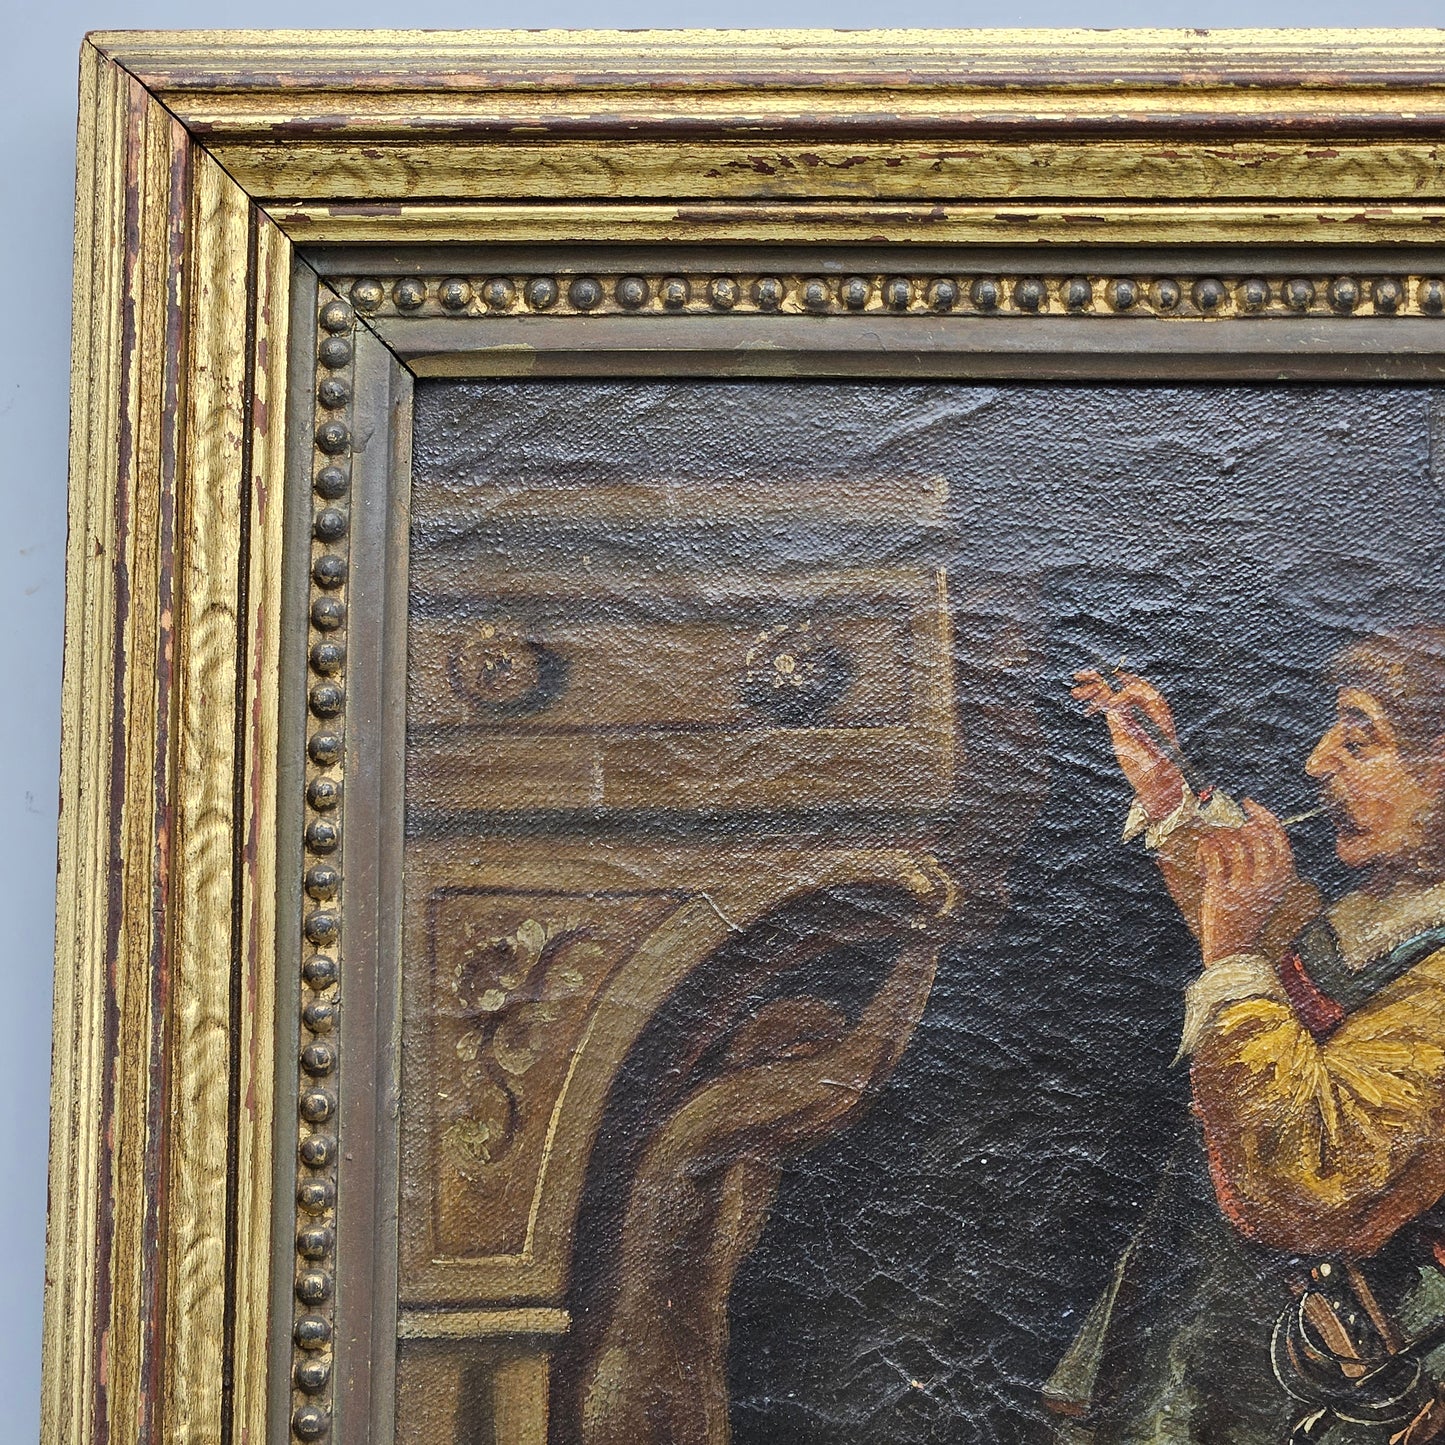 Antique Oil on Canvas Portrait of a Man Lighting His Tobacco Pipe